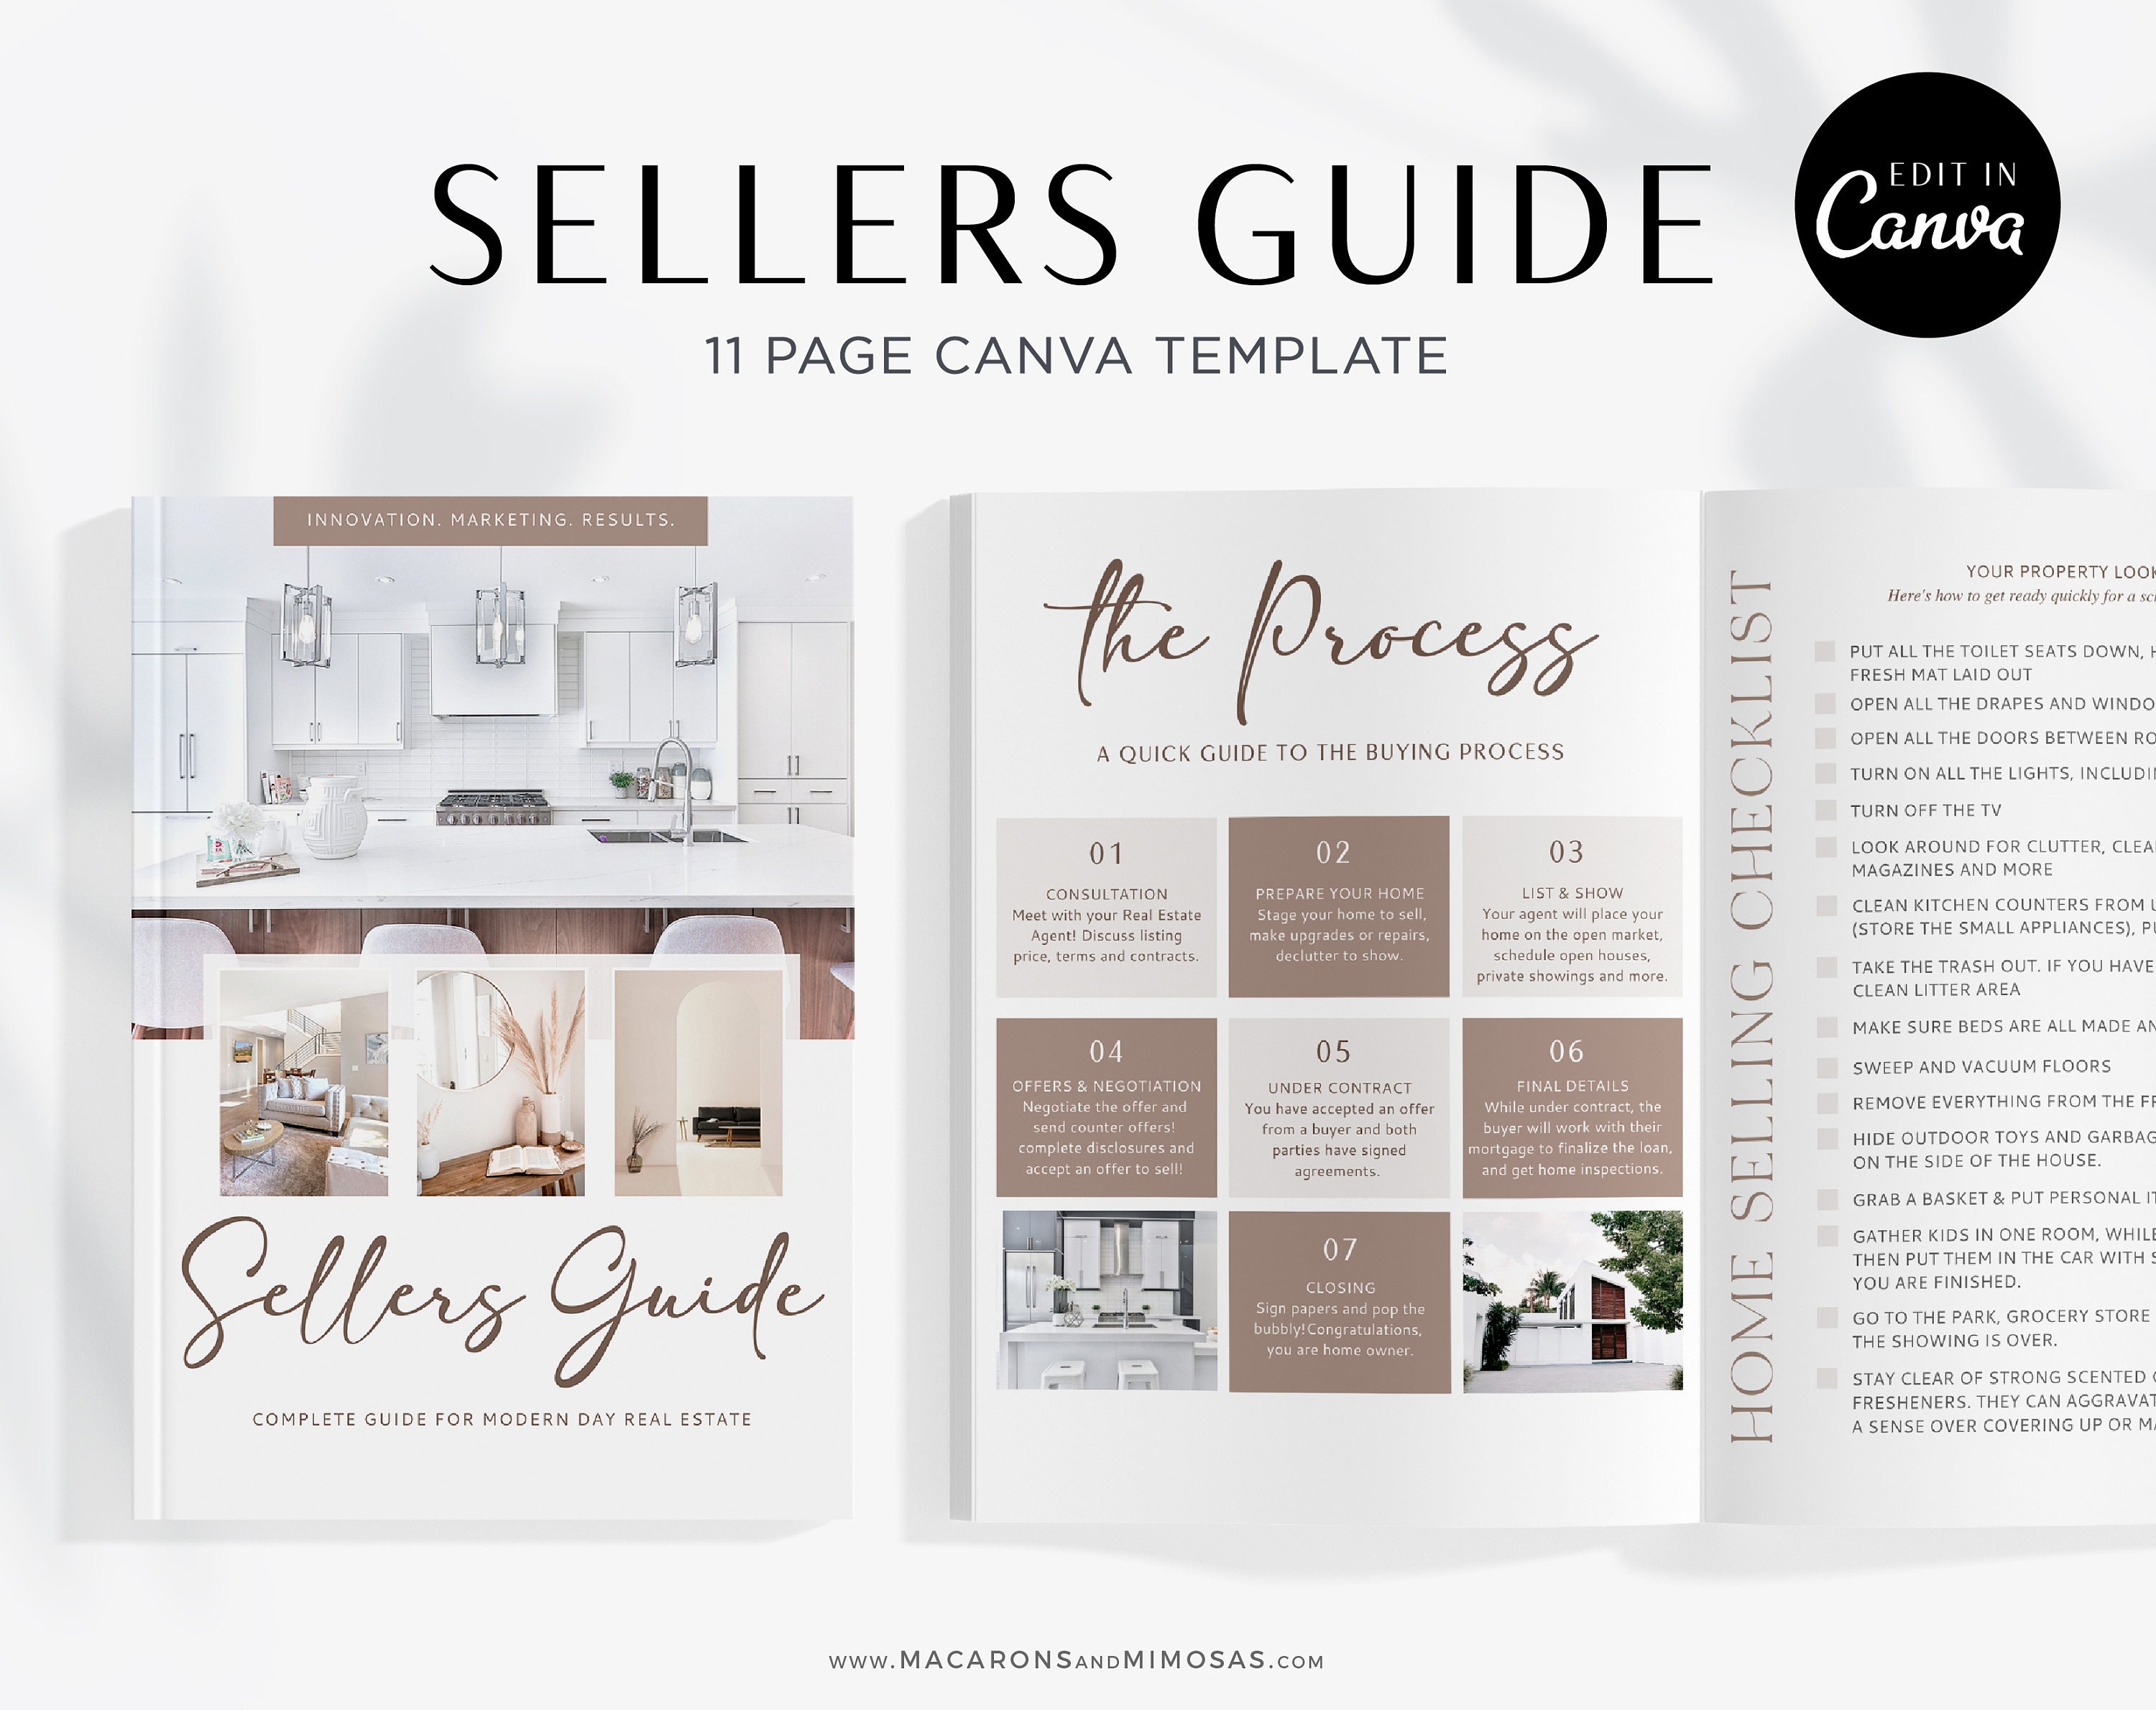 Pre Listing Packet for Realtors, Real Estate Packet Presentation Canva,  Home Seller Welcome Kit Guide Template and Listing Checklist Guide 